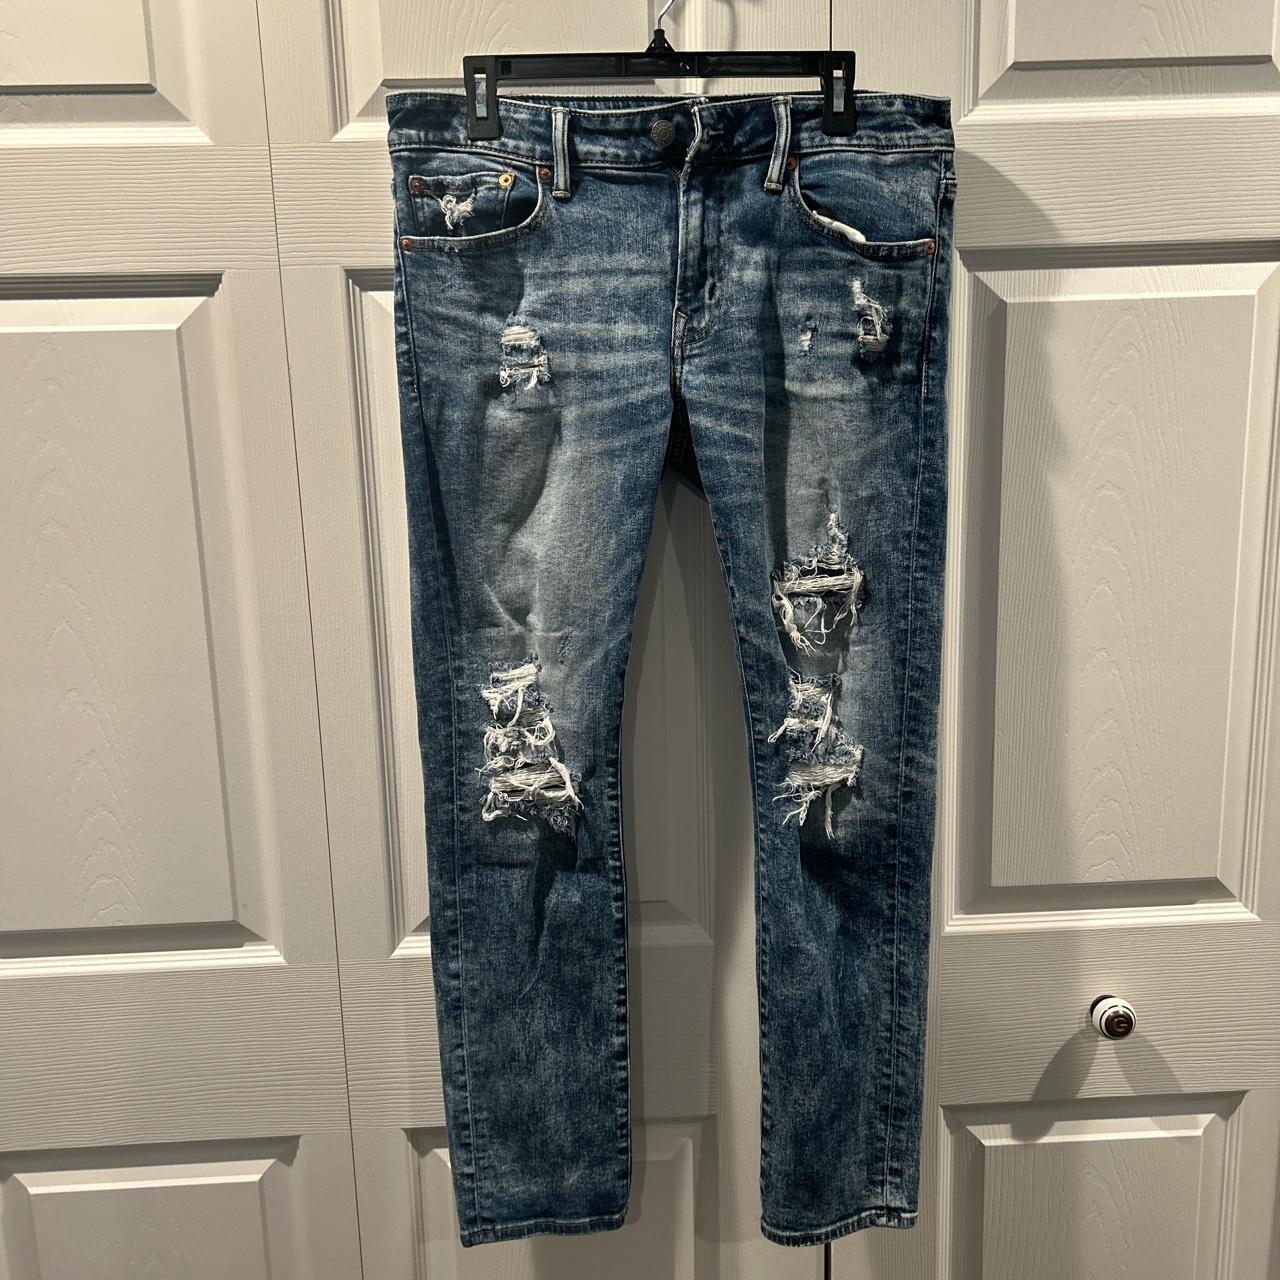 AMERICAN EAGLE brand dark ripped jeans 💙 •mid rise, - Depop